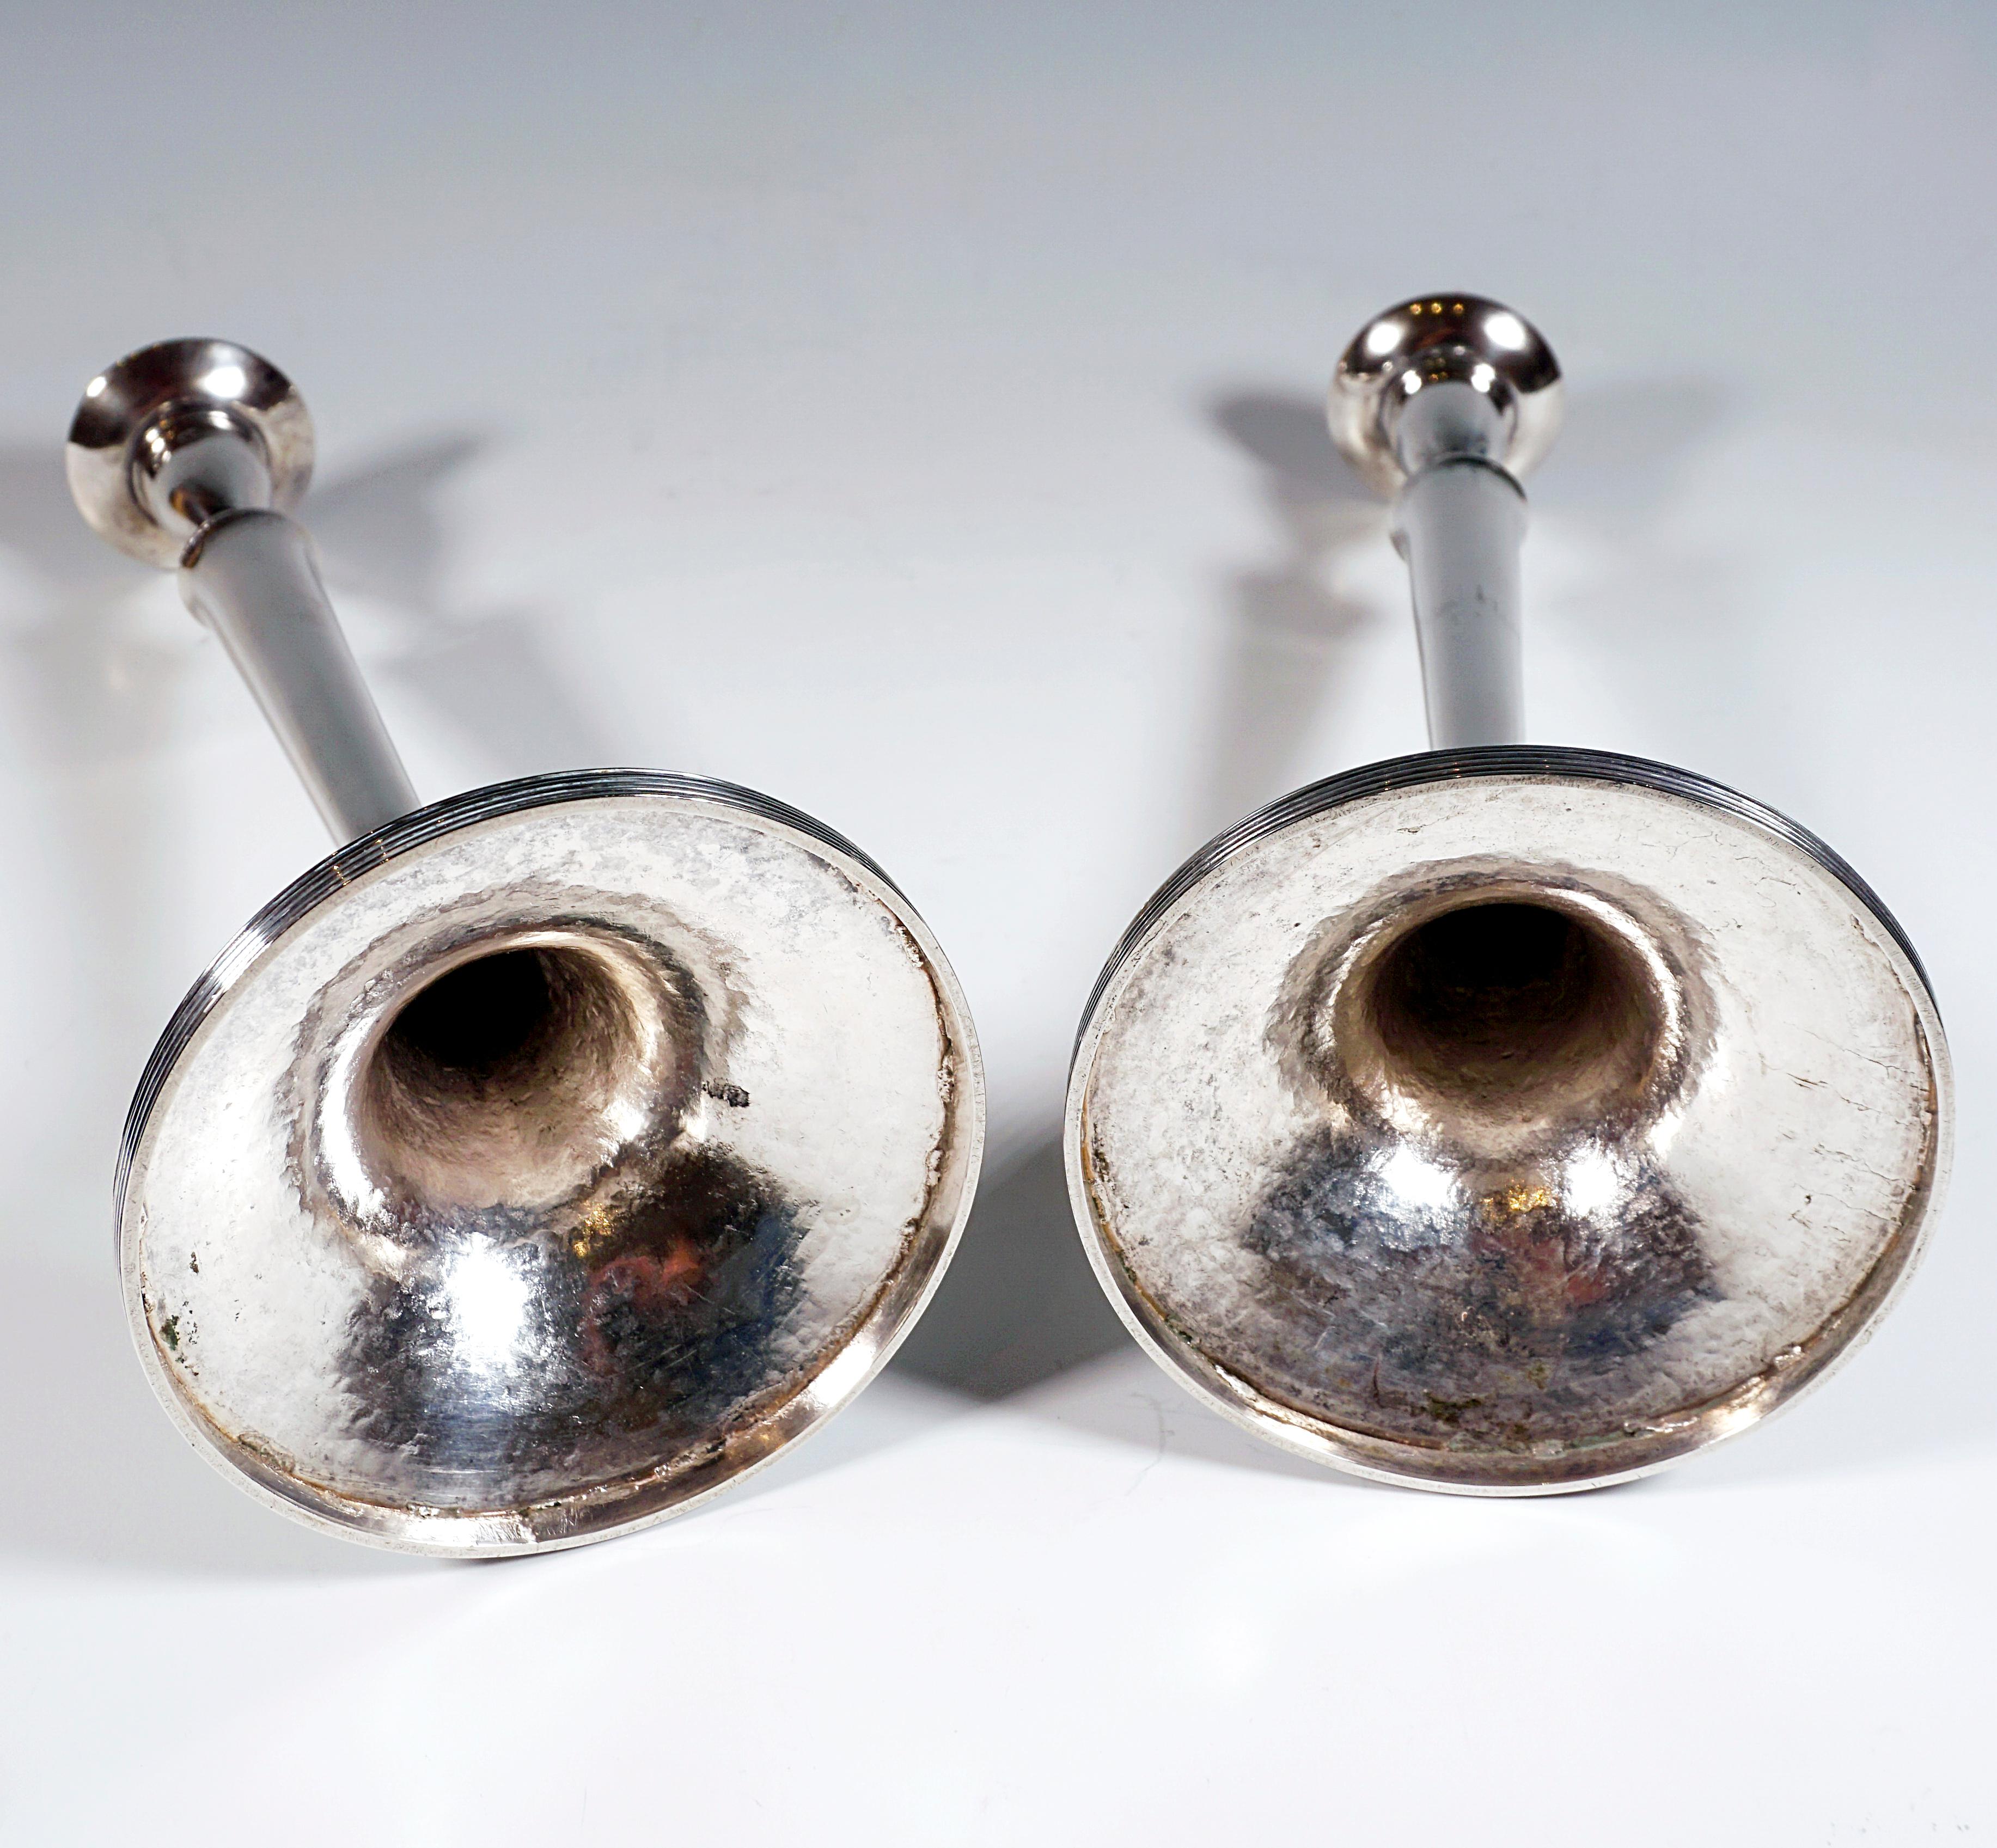 Early 19th Century Pair Of Antique Empire Silver Candle Holders, Austria-Hungary, Dated 1821 For Sale